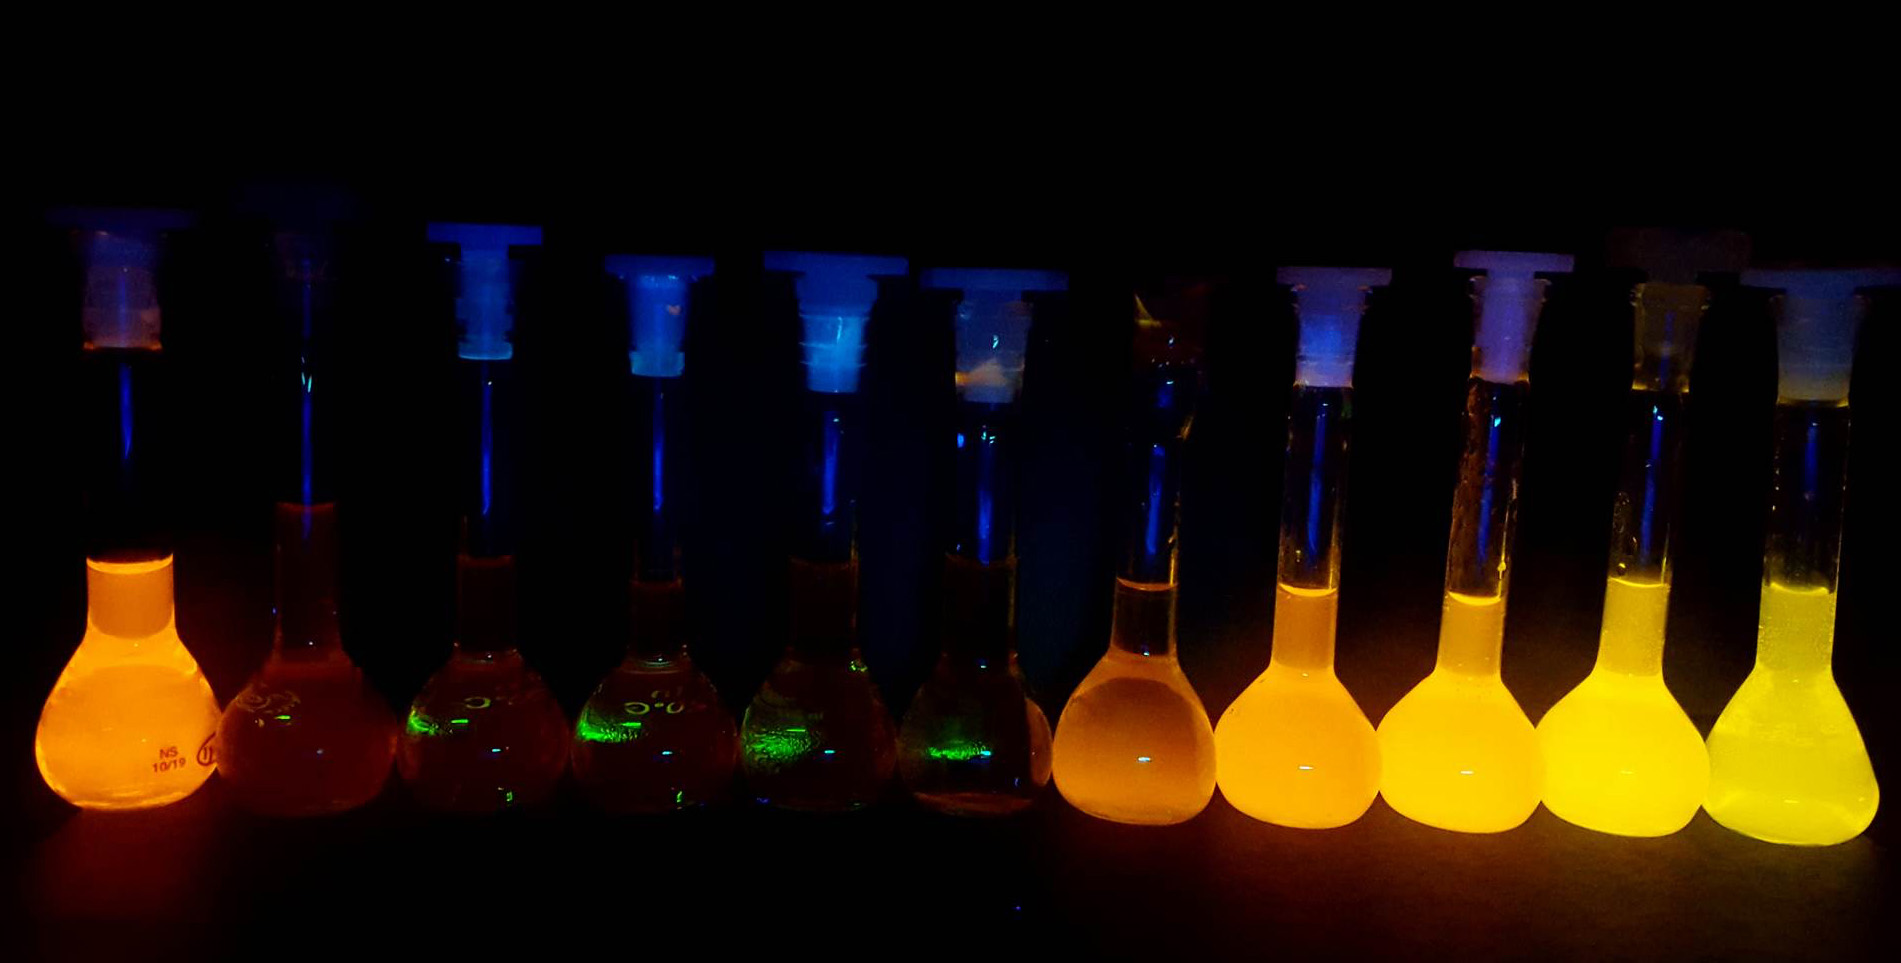 Luminescence-Changes-of-the-Same-Dye-Moving-From-Pure-Organic-Solvent-to-Water.jpg